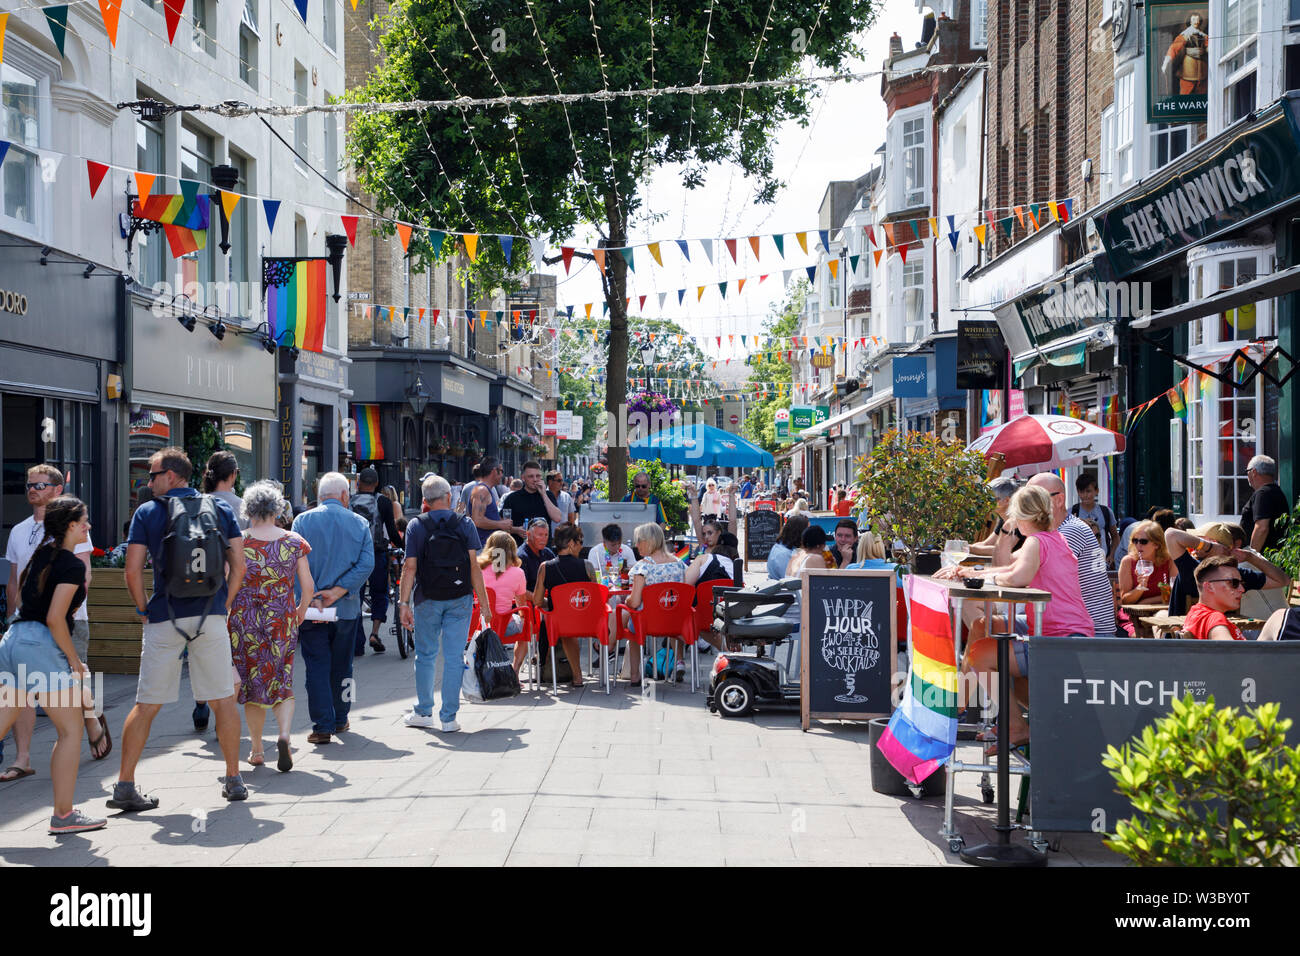 WORTHING, UK - JULY 13, 2019: People enjoying day out in the town decorated for Gay Pride Parade Stock Photo